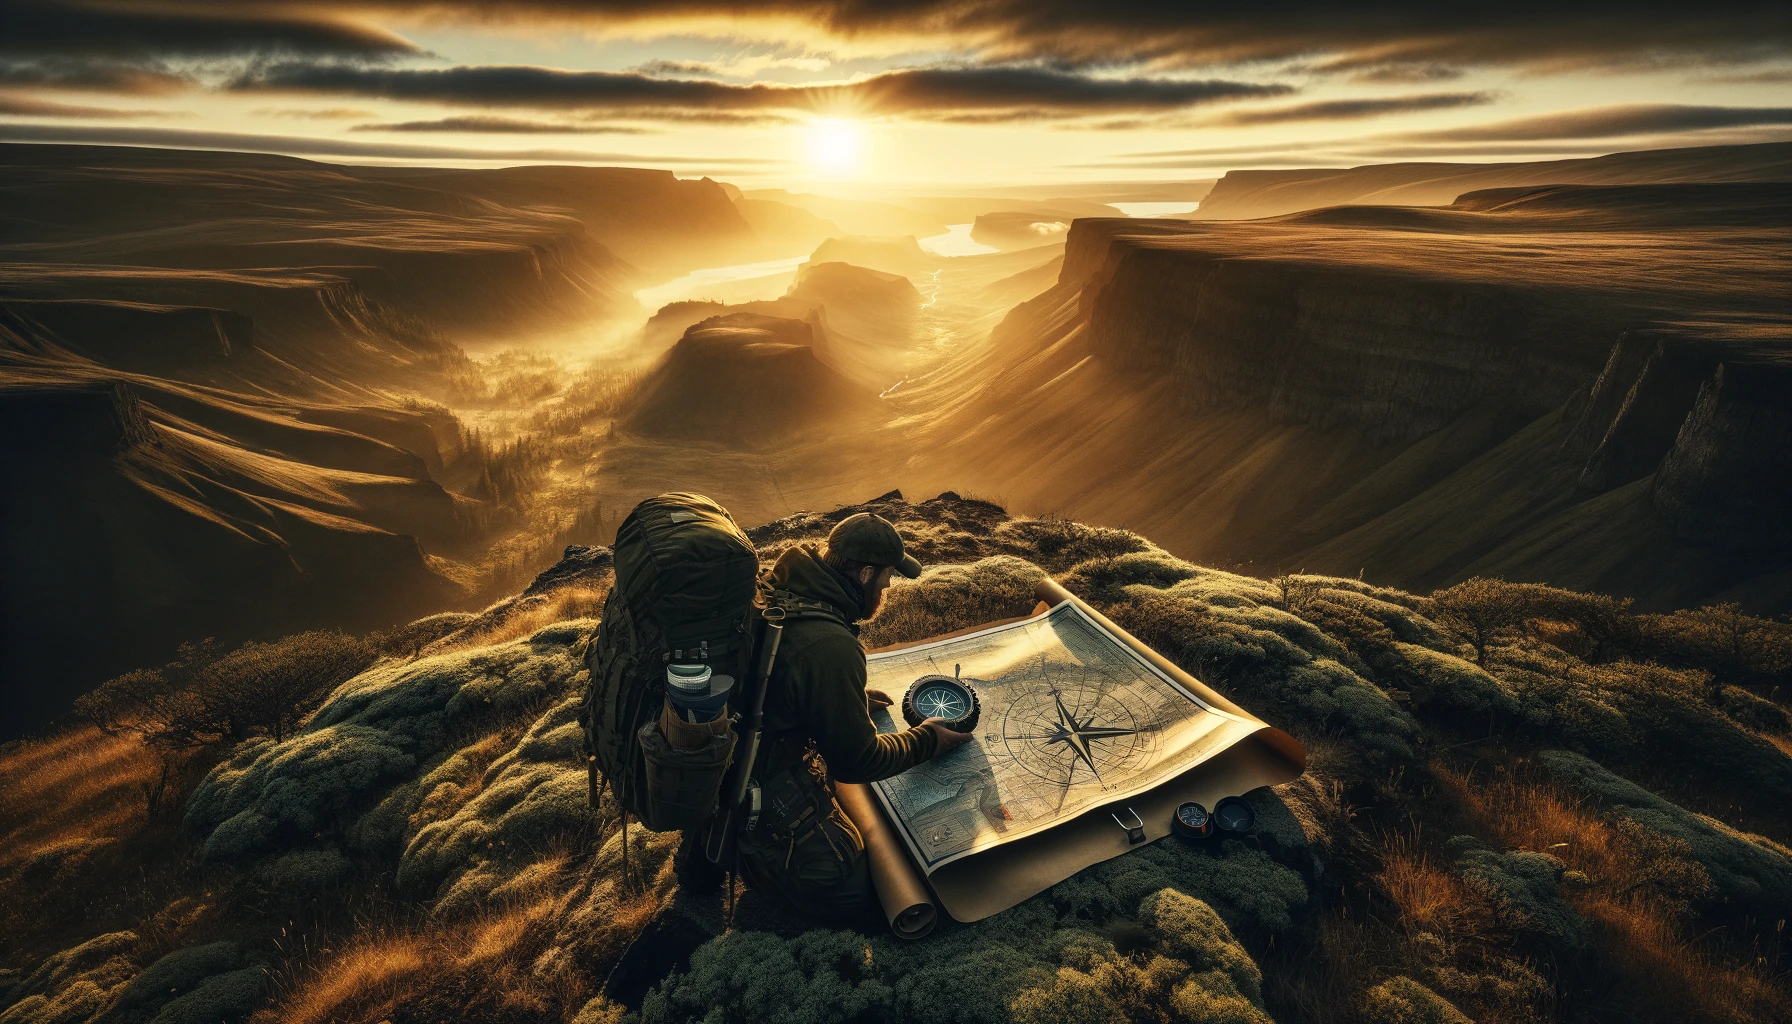 Lone prepper demonstrating orienting and navigating tips at dawn in a vast wilderness, equipped with a compass and topographic map, emphasizing skill, preparation, and respect for nature